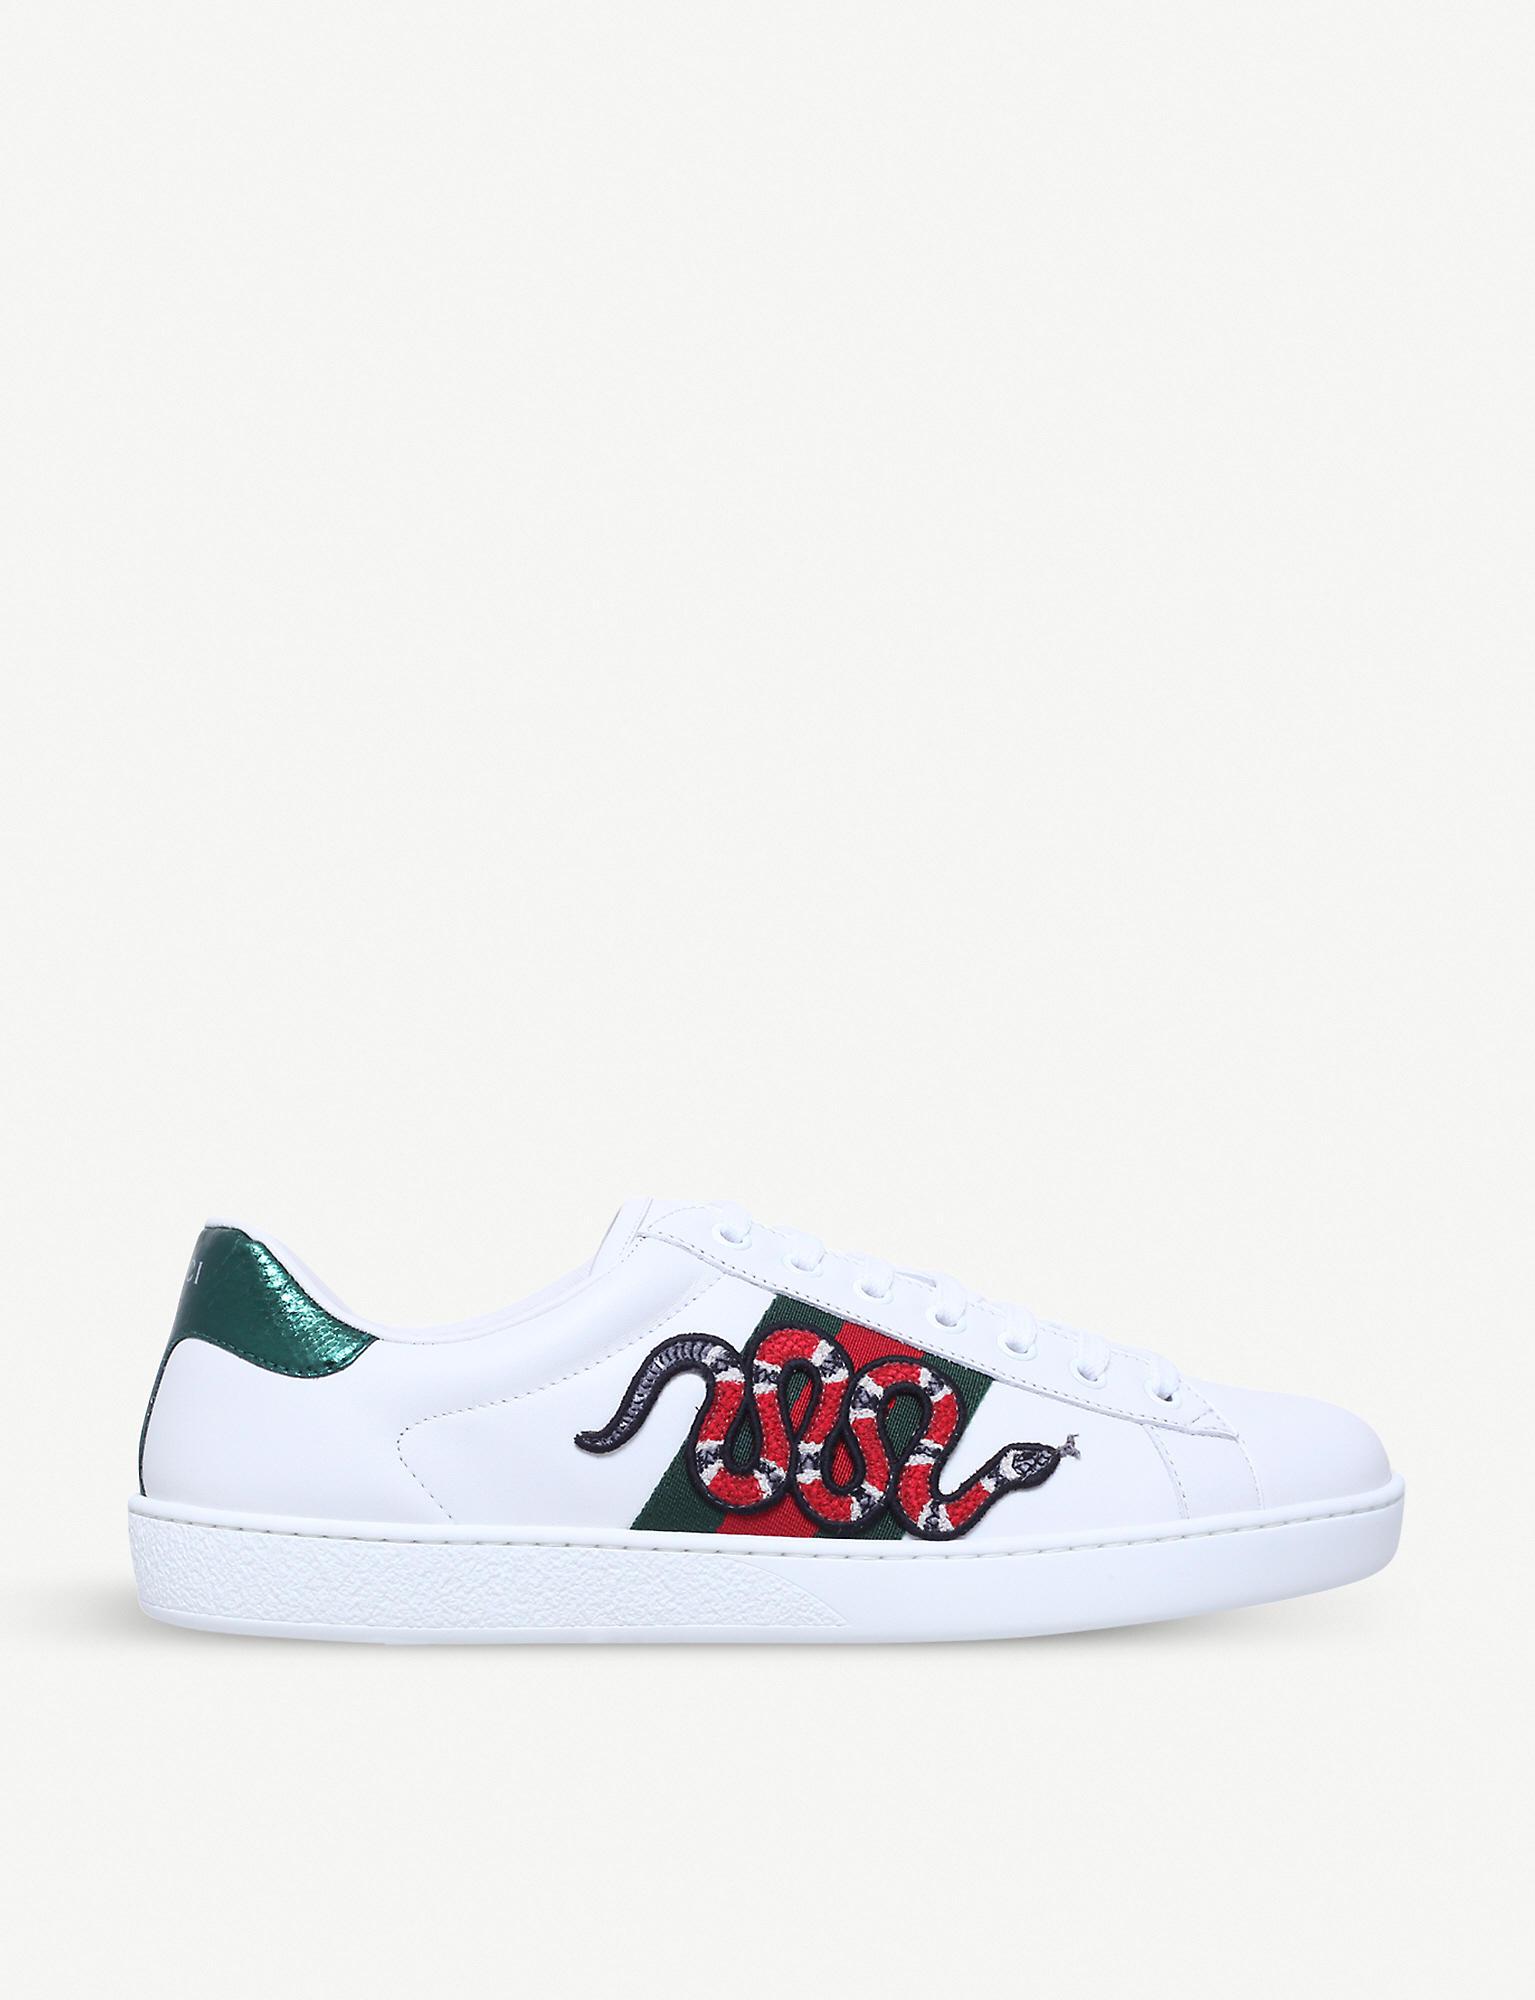 gucci sneakers snake price